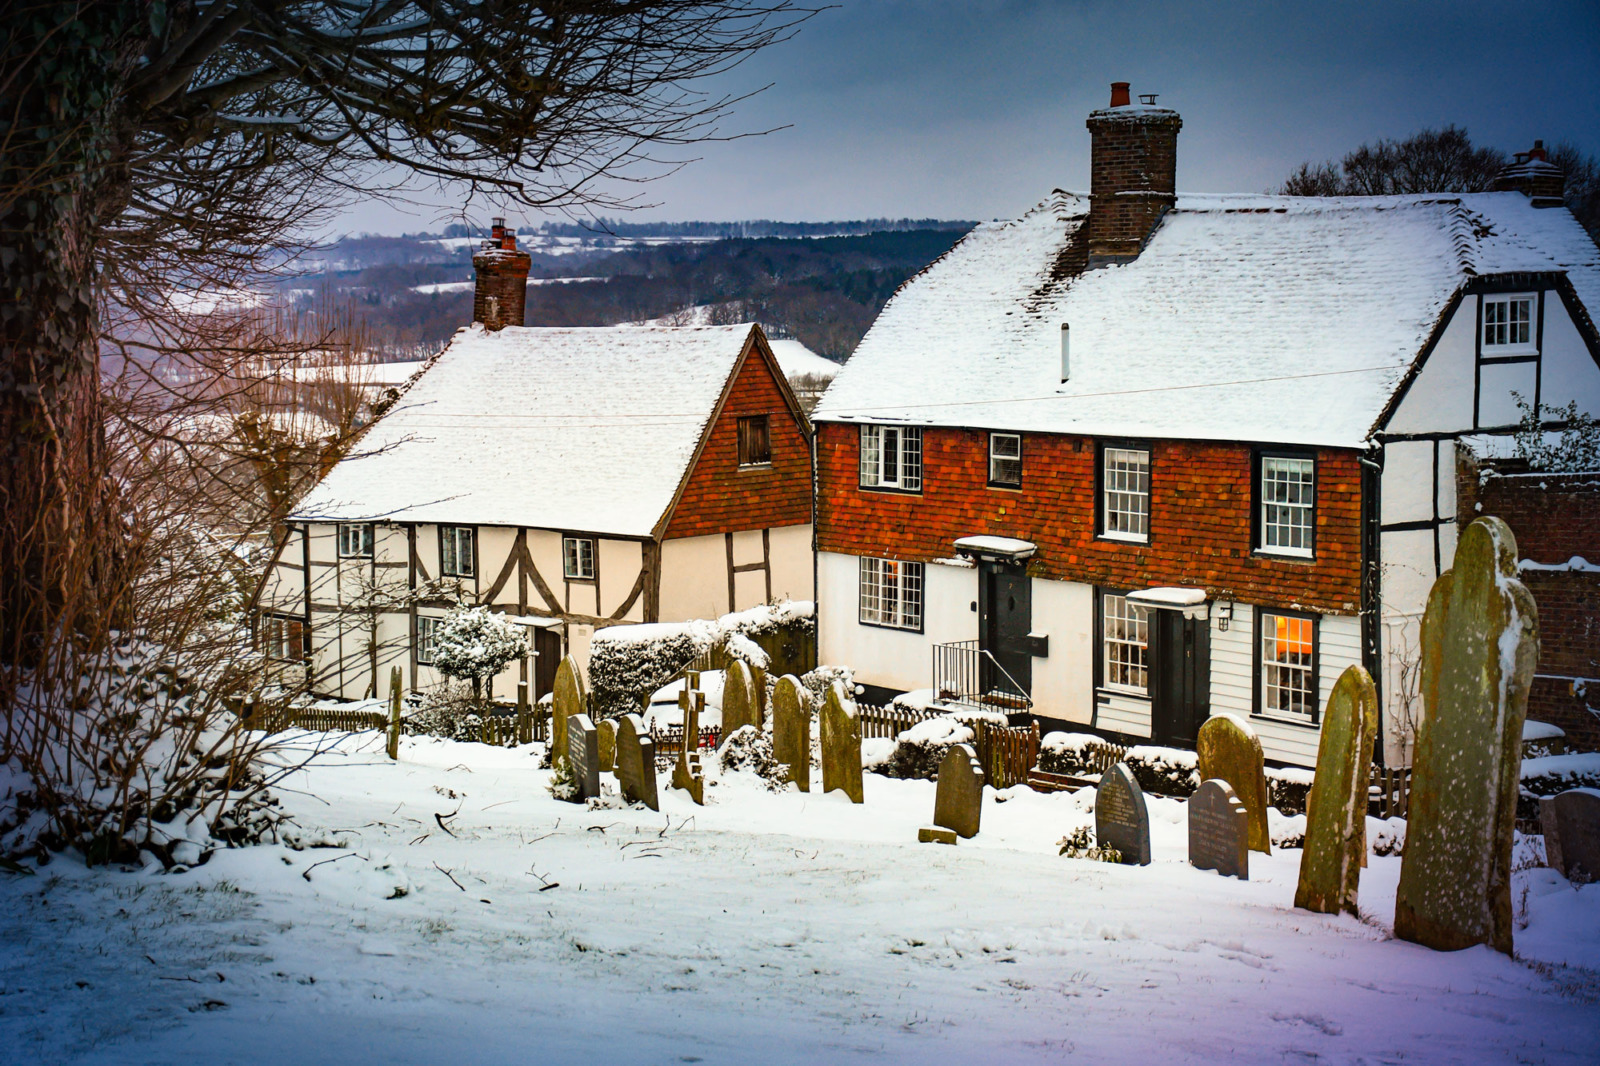 Burwash in the snow © French Moments